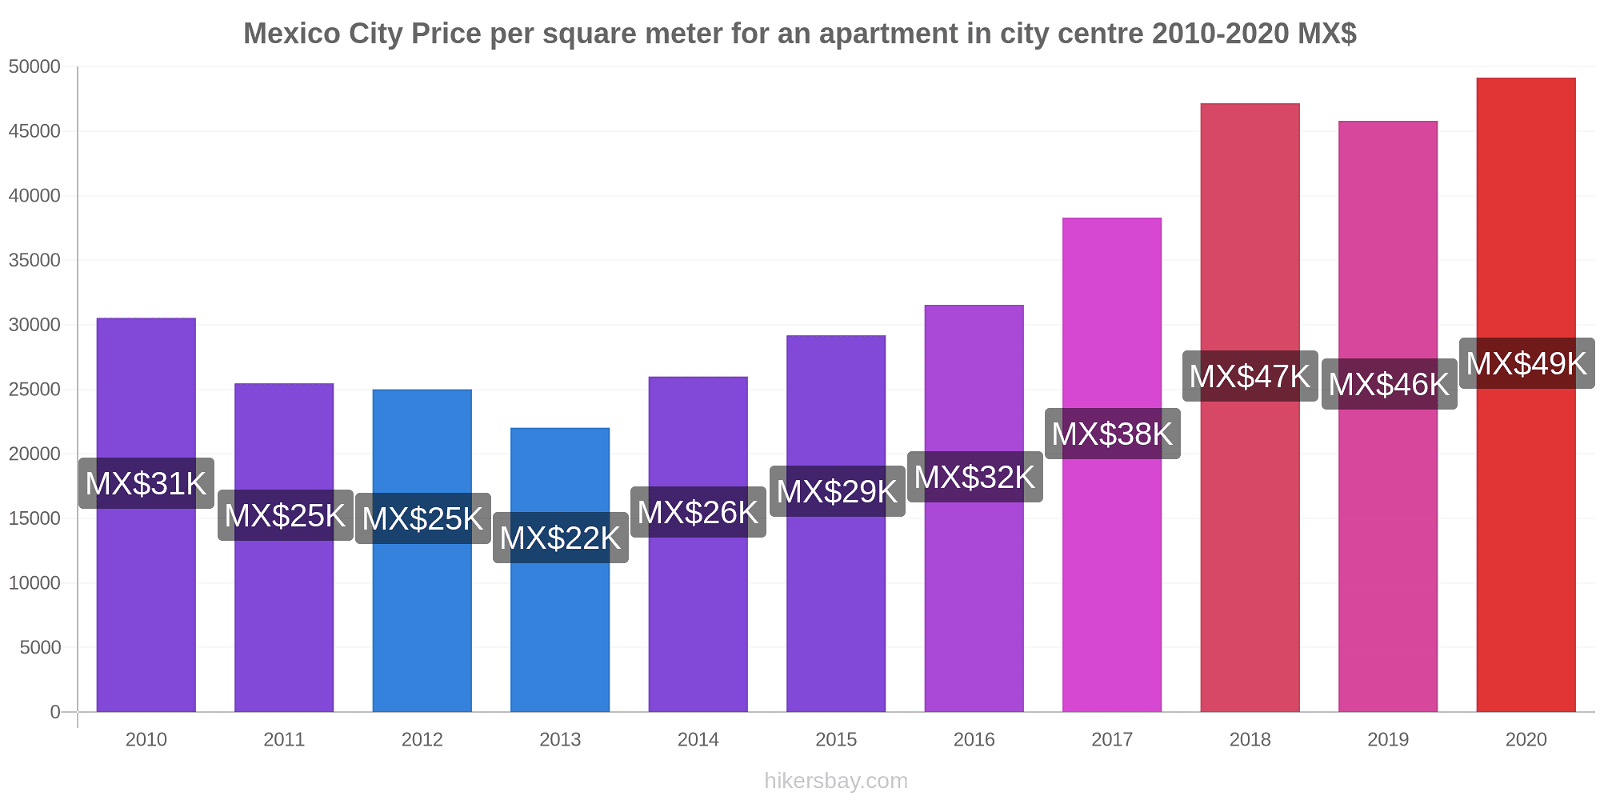 Mexico City price changes Price per square meter for an apartment in city centre hikersbay.com